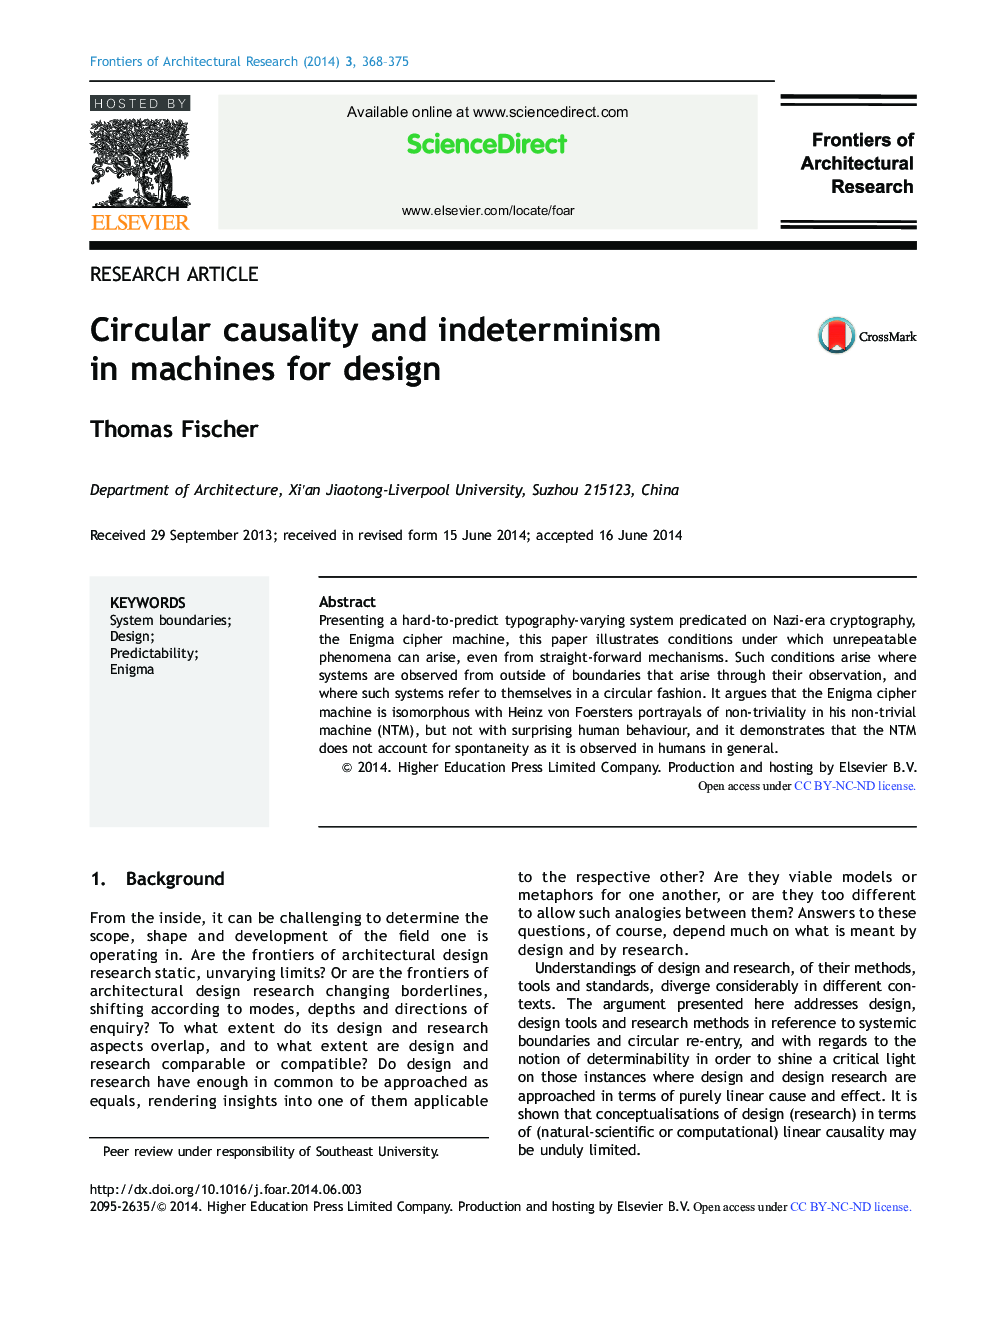 Circular causality and indeterminism in machines for design 